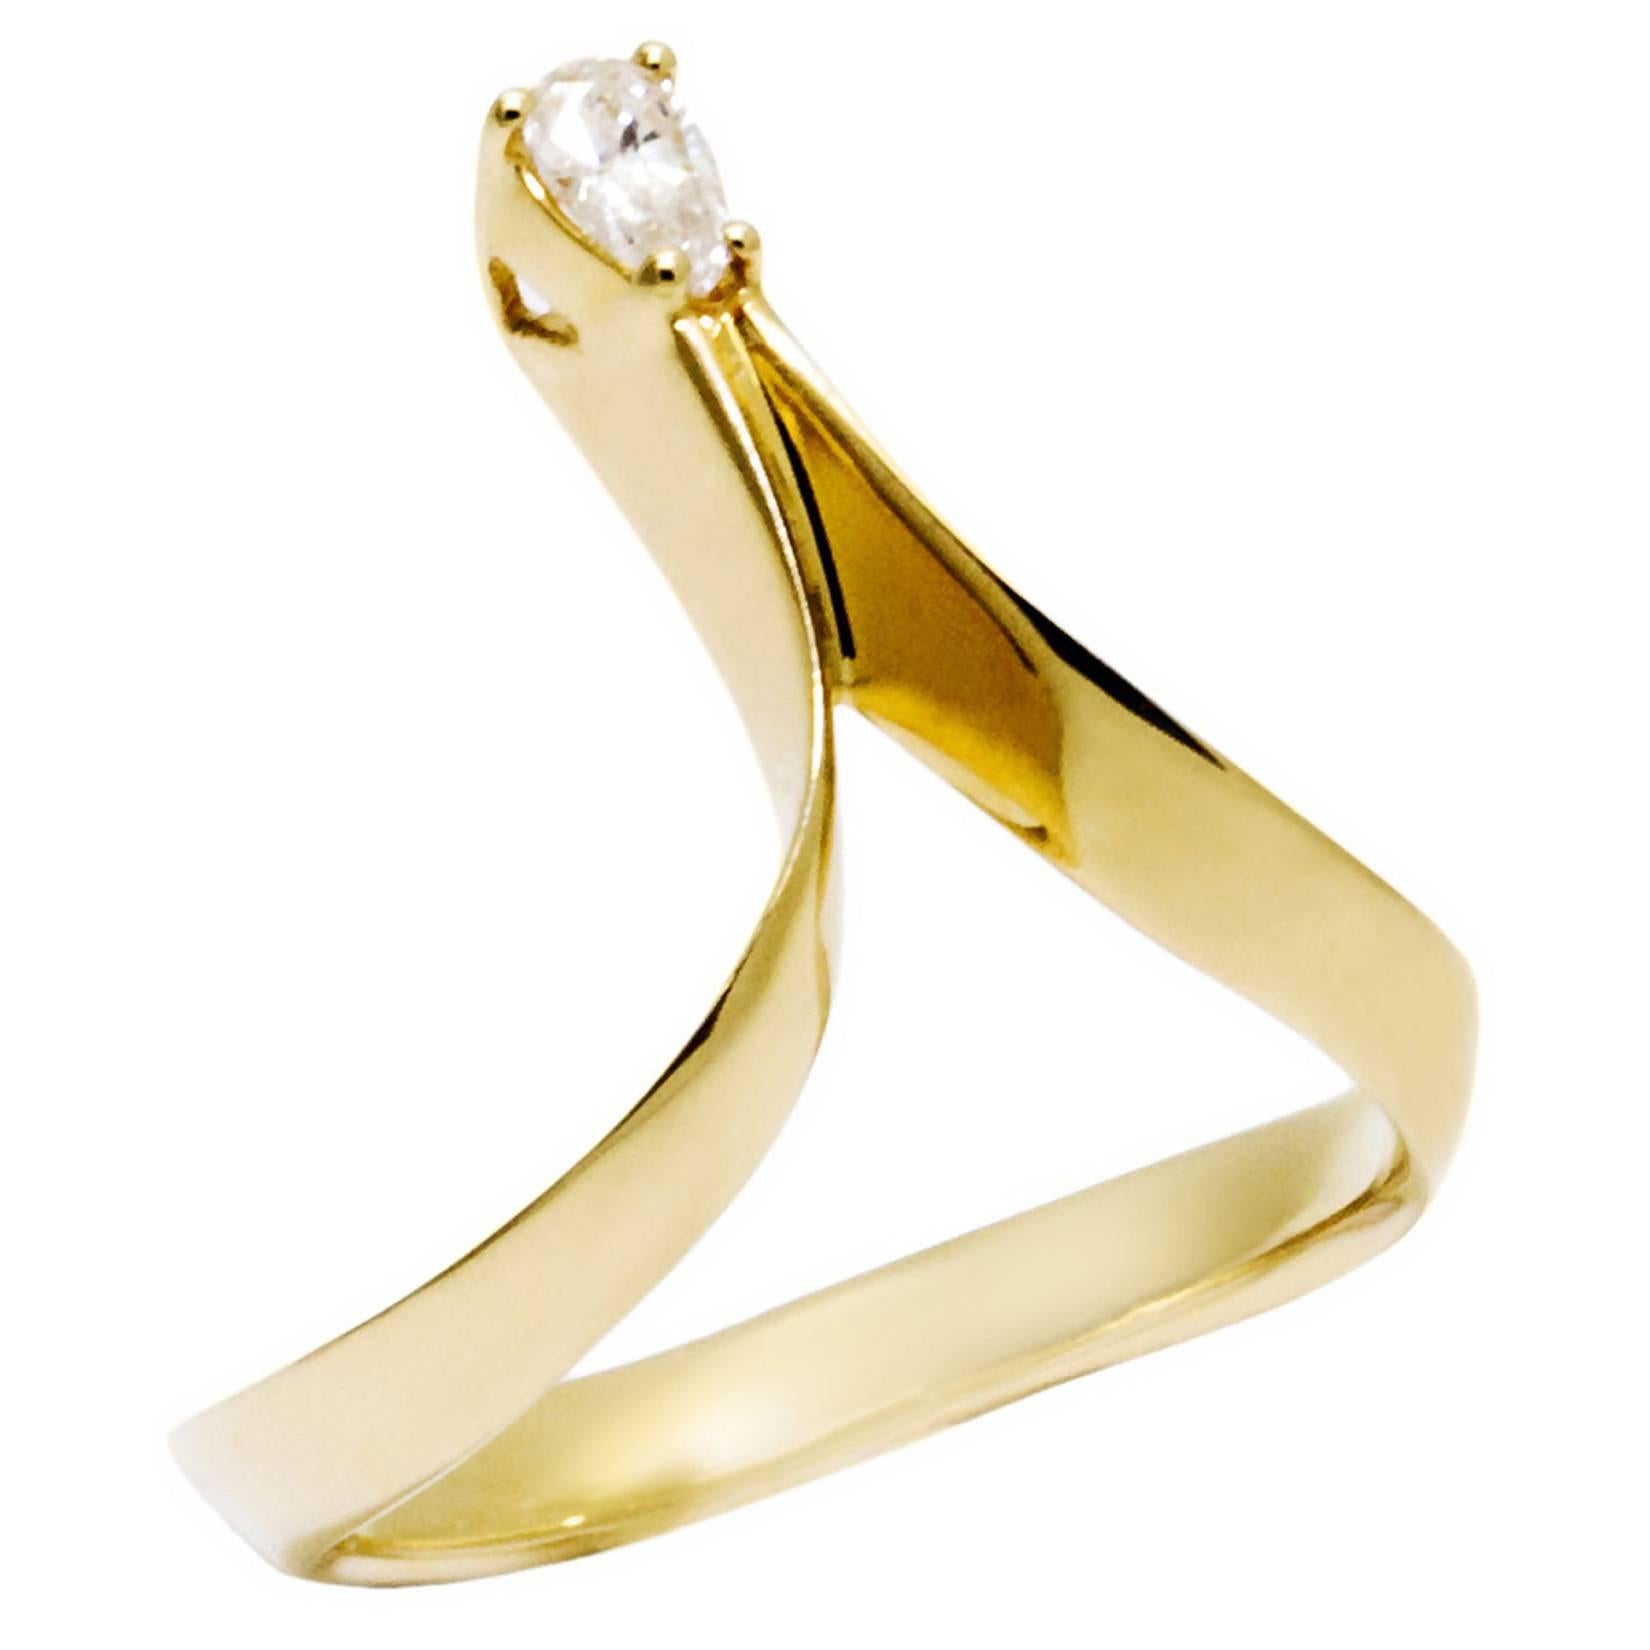 Daou Diamond Ring, Pear Cut Yellow Gold, Alternative Engagement Ring For Sale